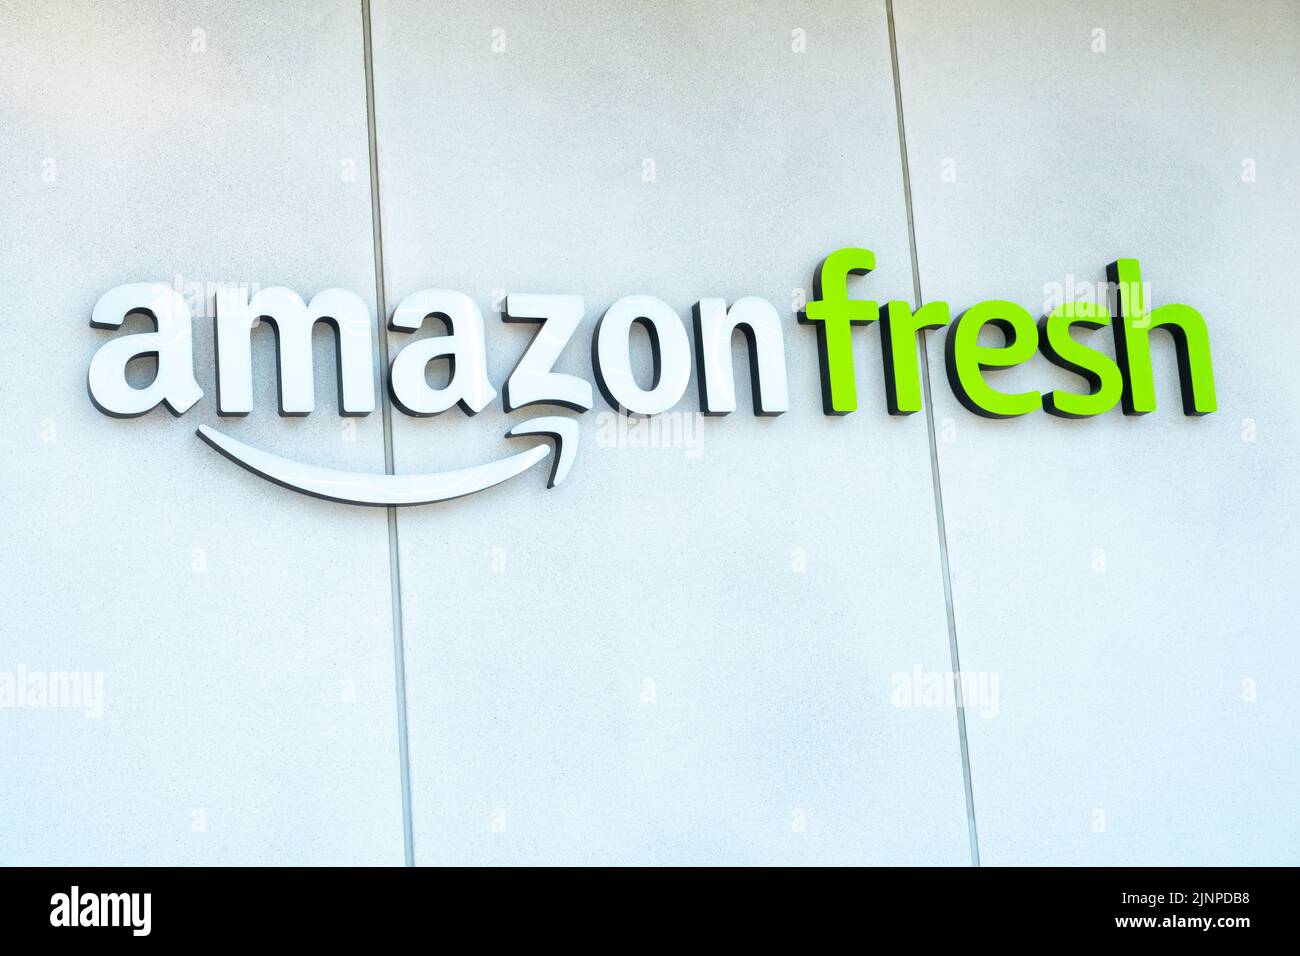 Canary Wharf, London, UK.  Low angle view of Amazon Fresh brand logo on building exterior located at Canary Wharf. Stock Photo